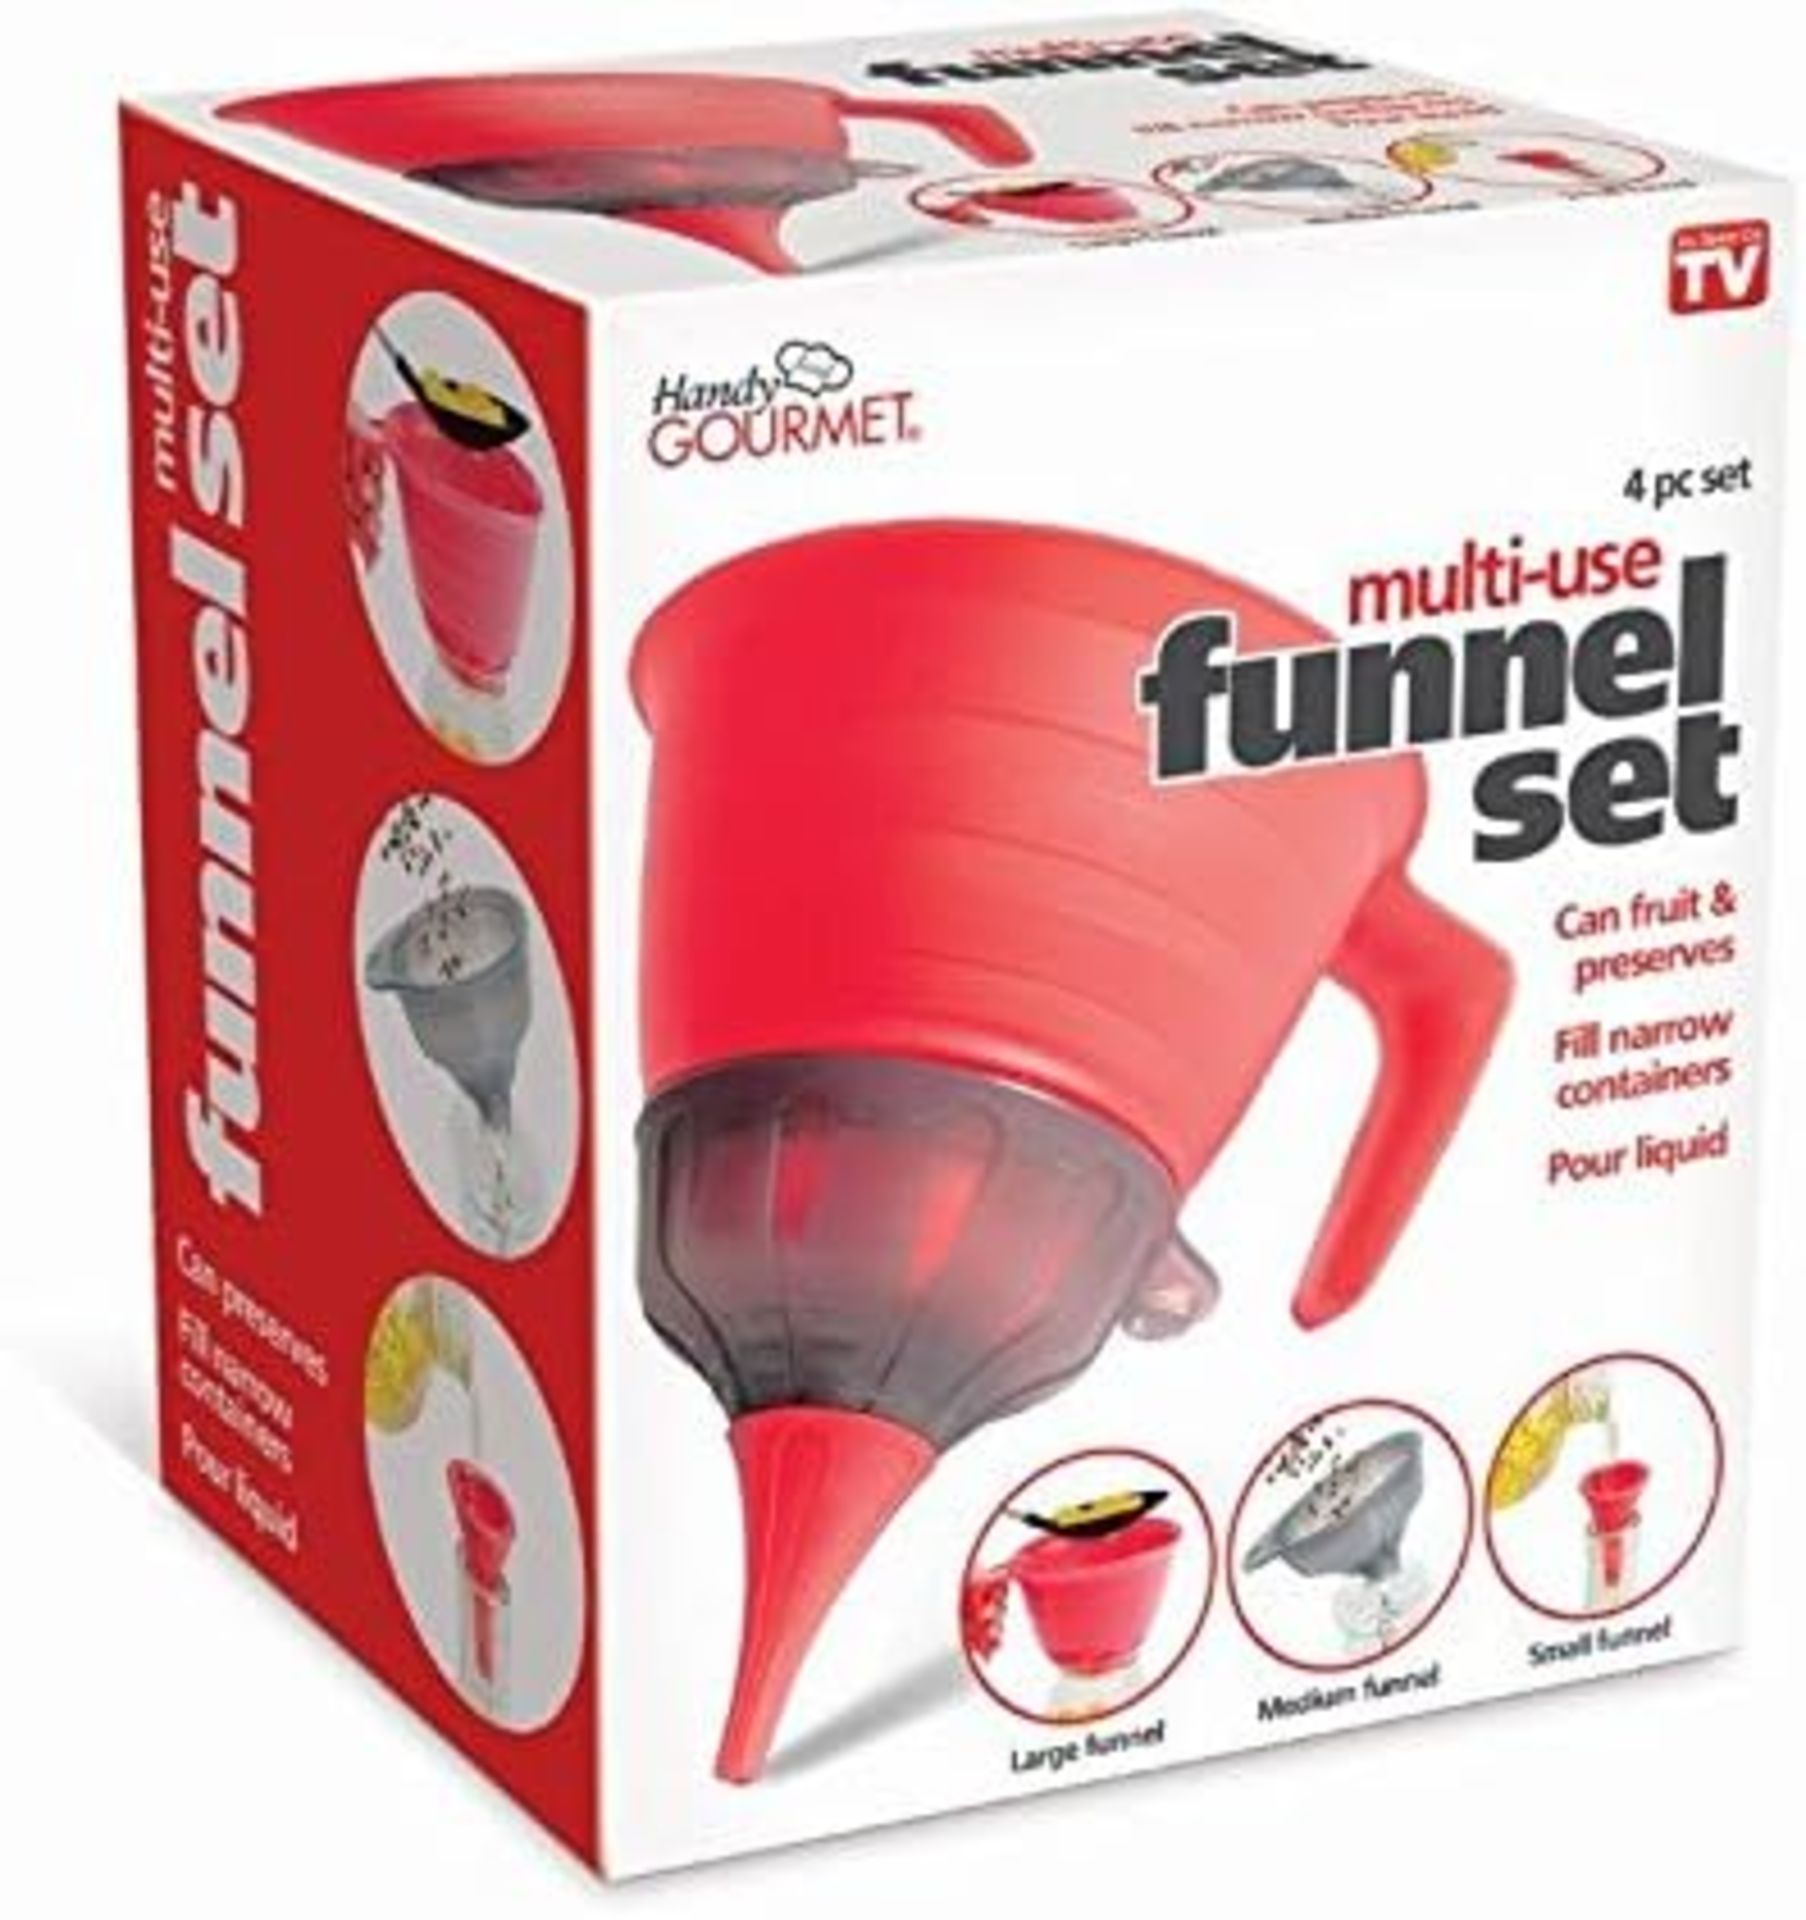 40 X BRAND NEW 3 IN 1 SMALL, MEDIUM, LARGE KITCHEN FUNNEL SET AND HANDLE FOOD LIQUID HANDY GOURMET